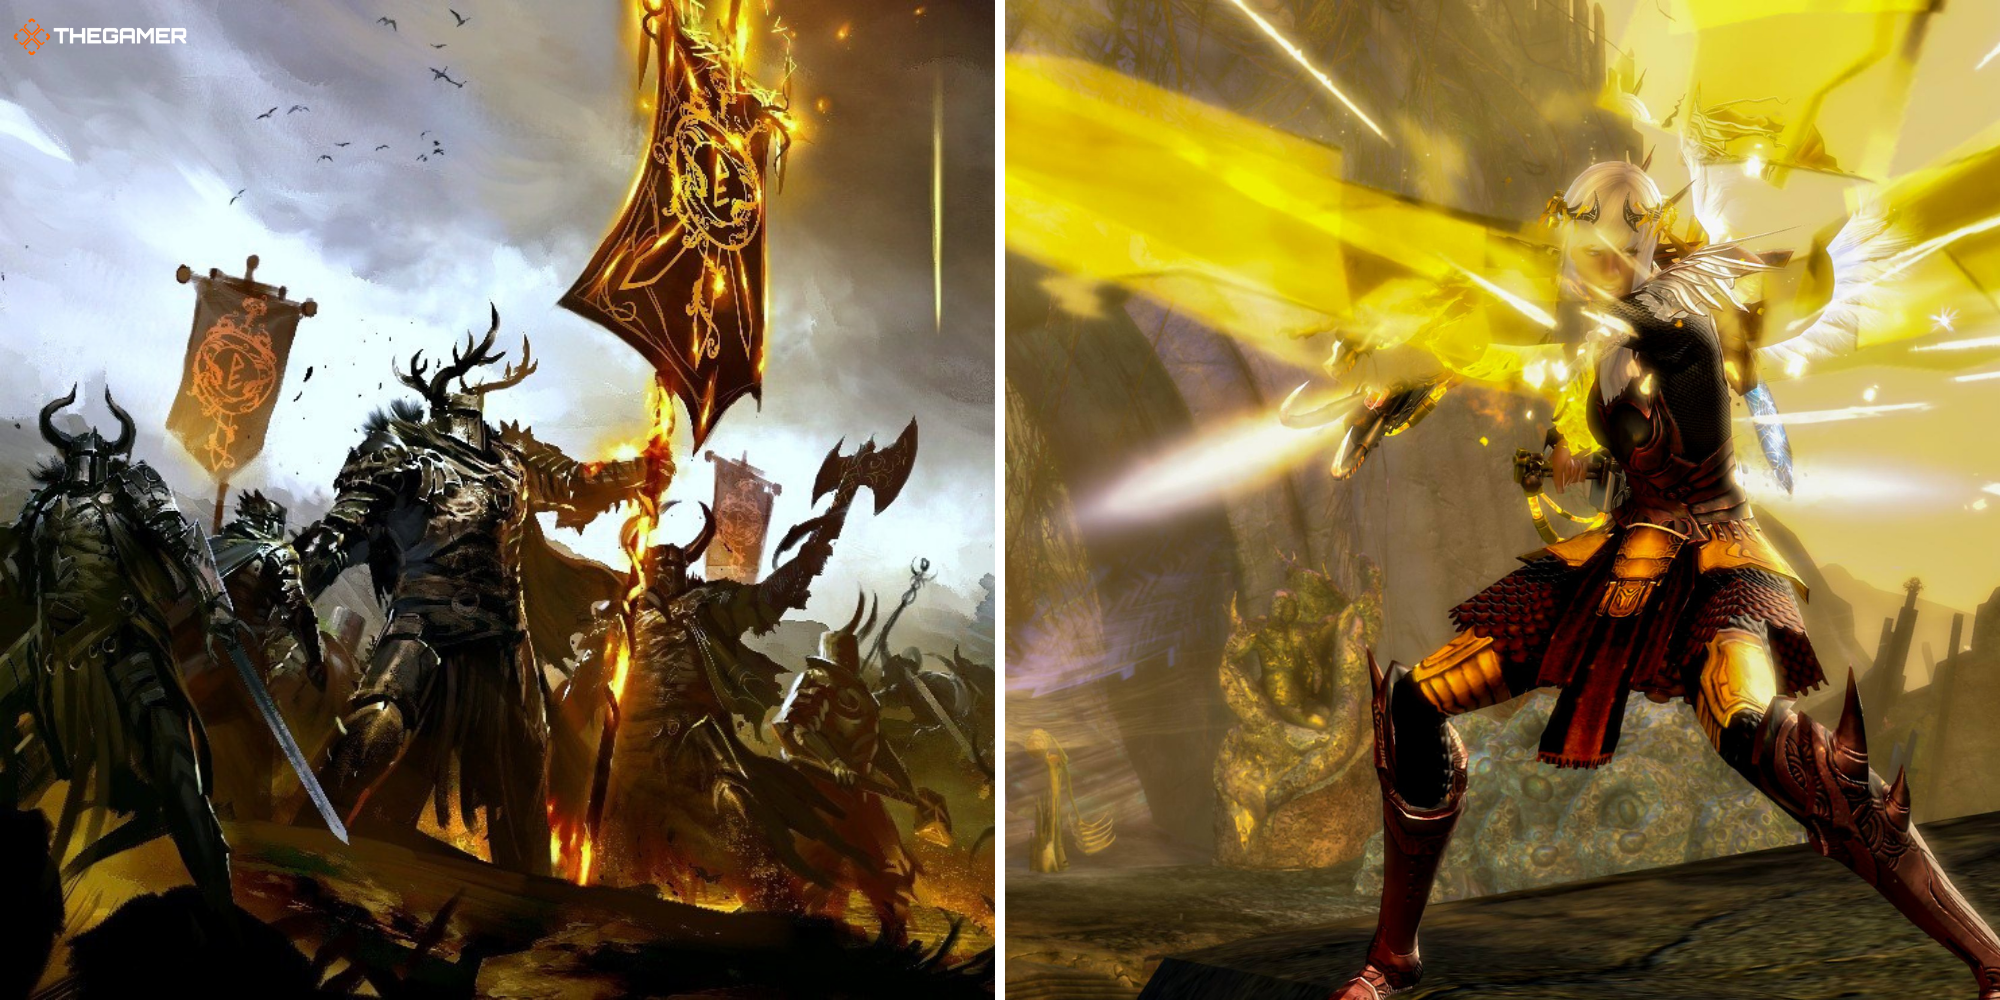 Guild Wars 2 Warrior - Concept art on left, Player in-game screenshot on right